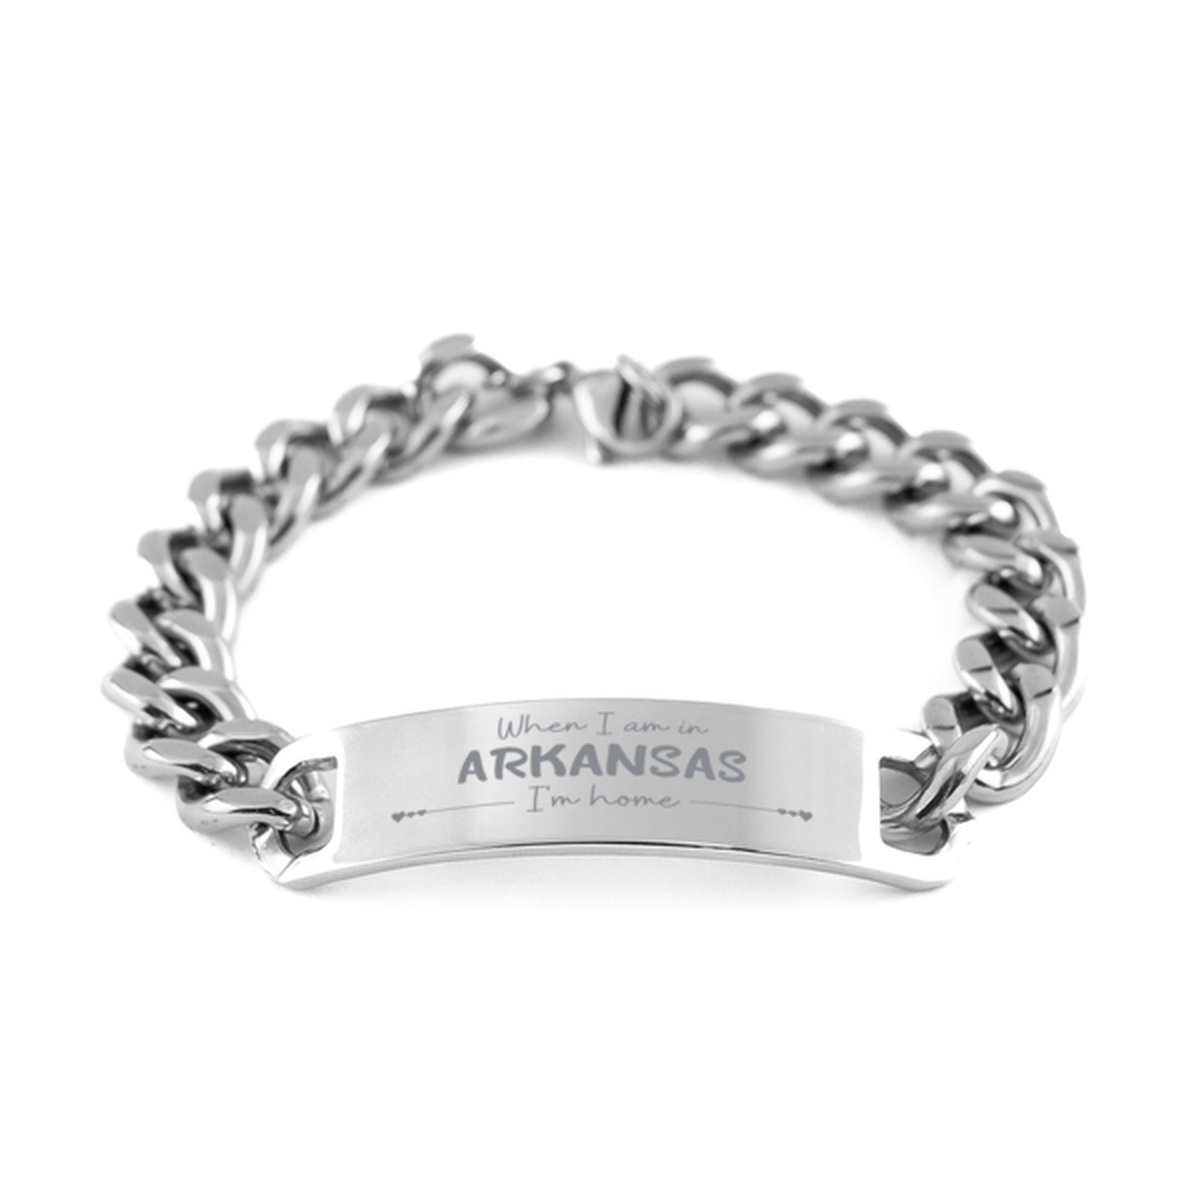 When I am in Arkansas I'm home Cuban Chain Stainless Steel Bracelet, Cheap Gifts For Arkansas, State Arkansas Birthday Gifts for Friends Coworker